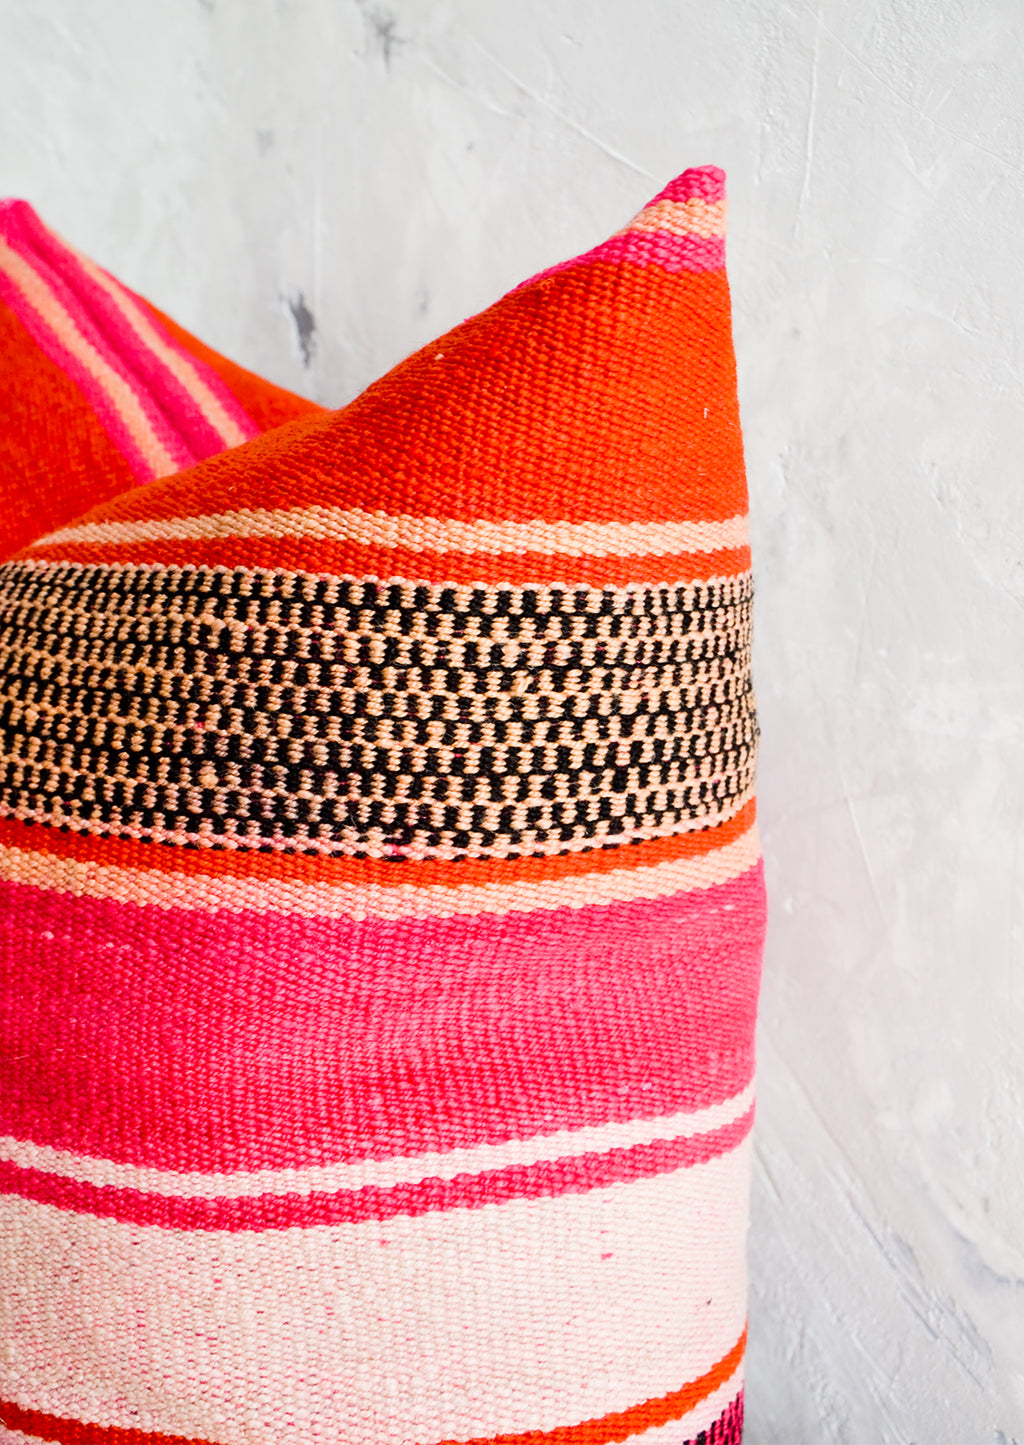 2: Throw pillow made from vintage striped wool in vibrant pink, orange and peach